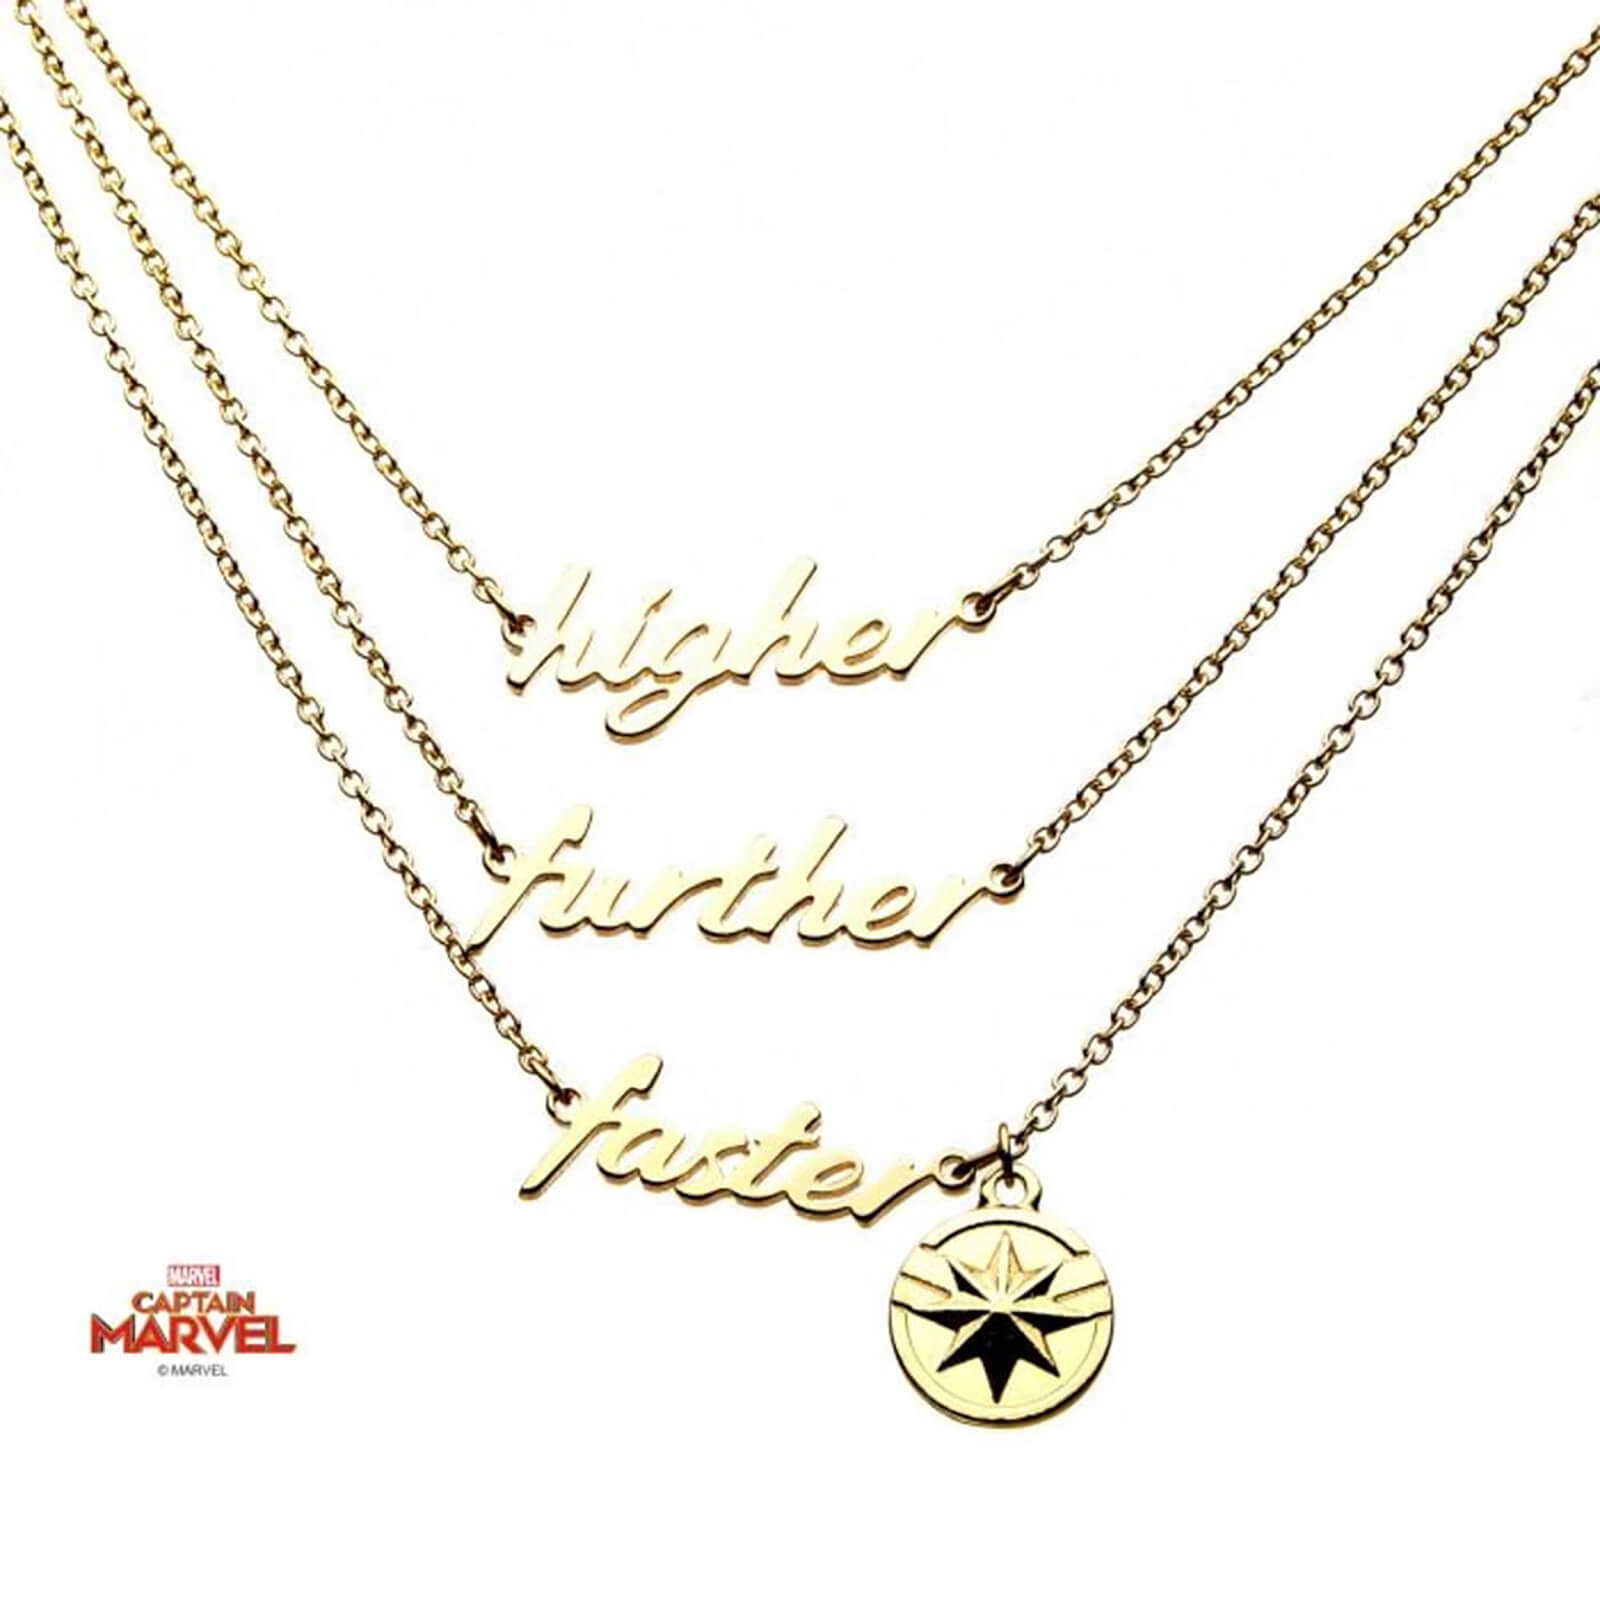 SalesOne Marvel's Captain Marvel Polished Finish 3-Tiered Necklace